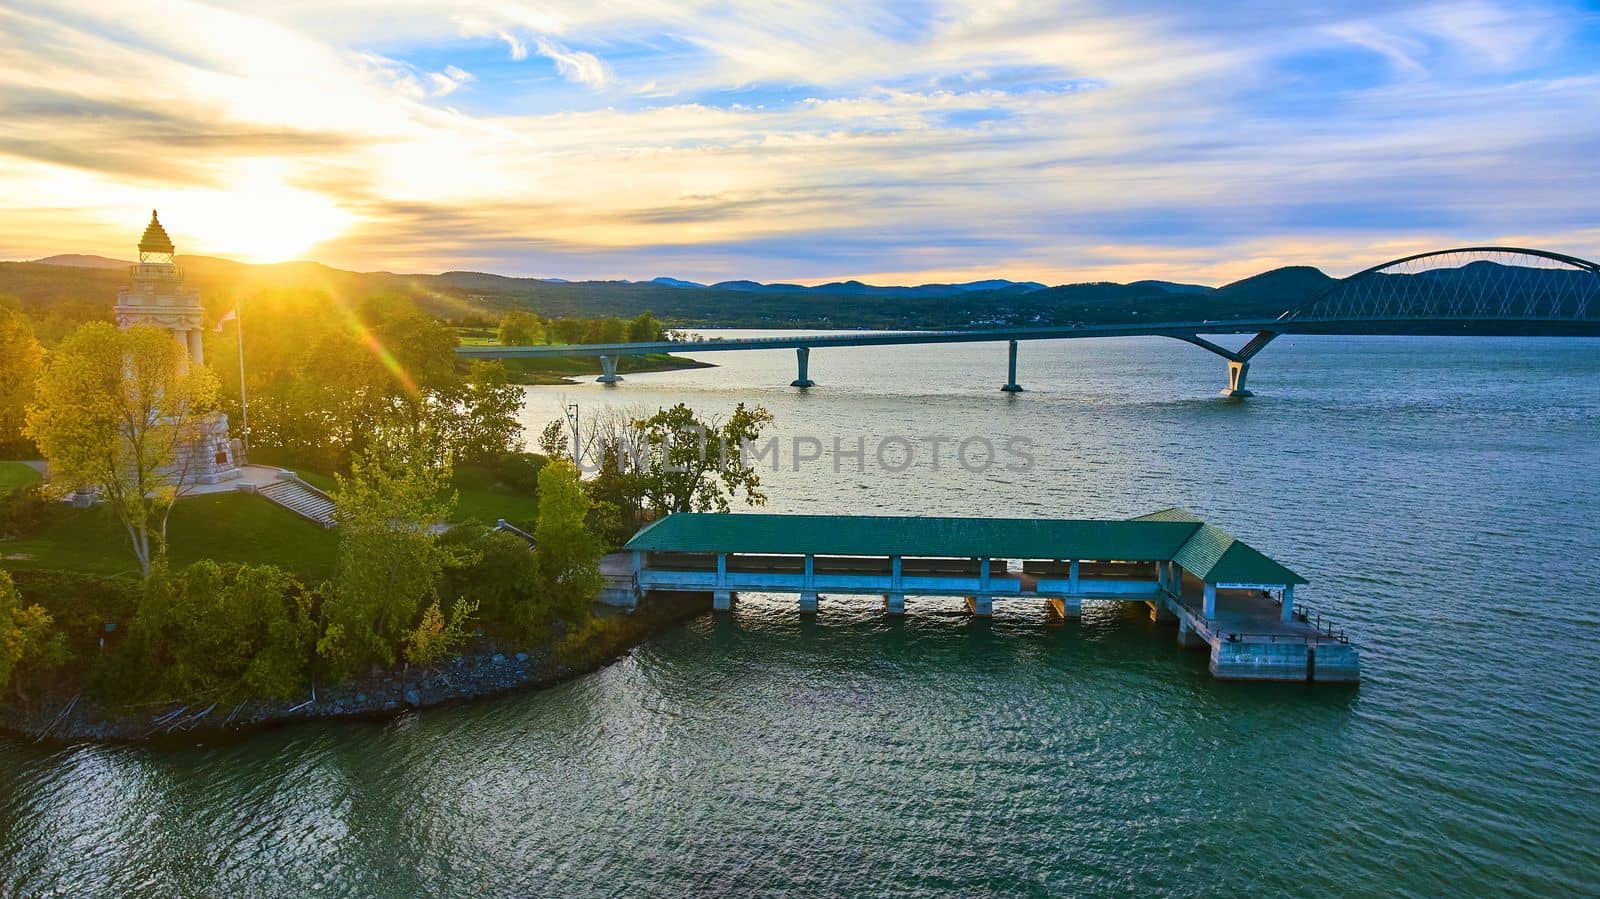 Tower and docks with bridge connecting New York to Vermont and sun setting behind mountains by njproductions